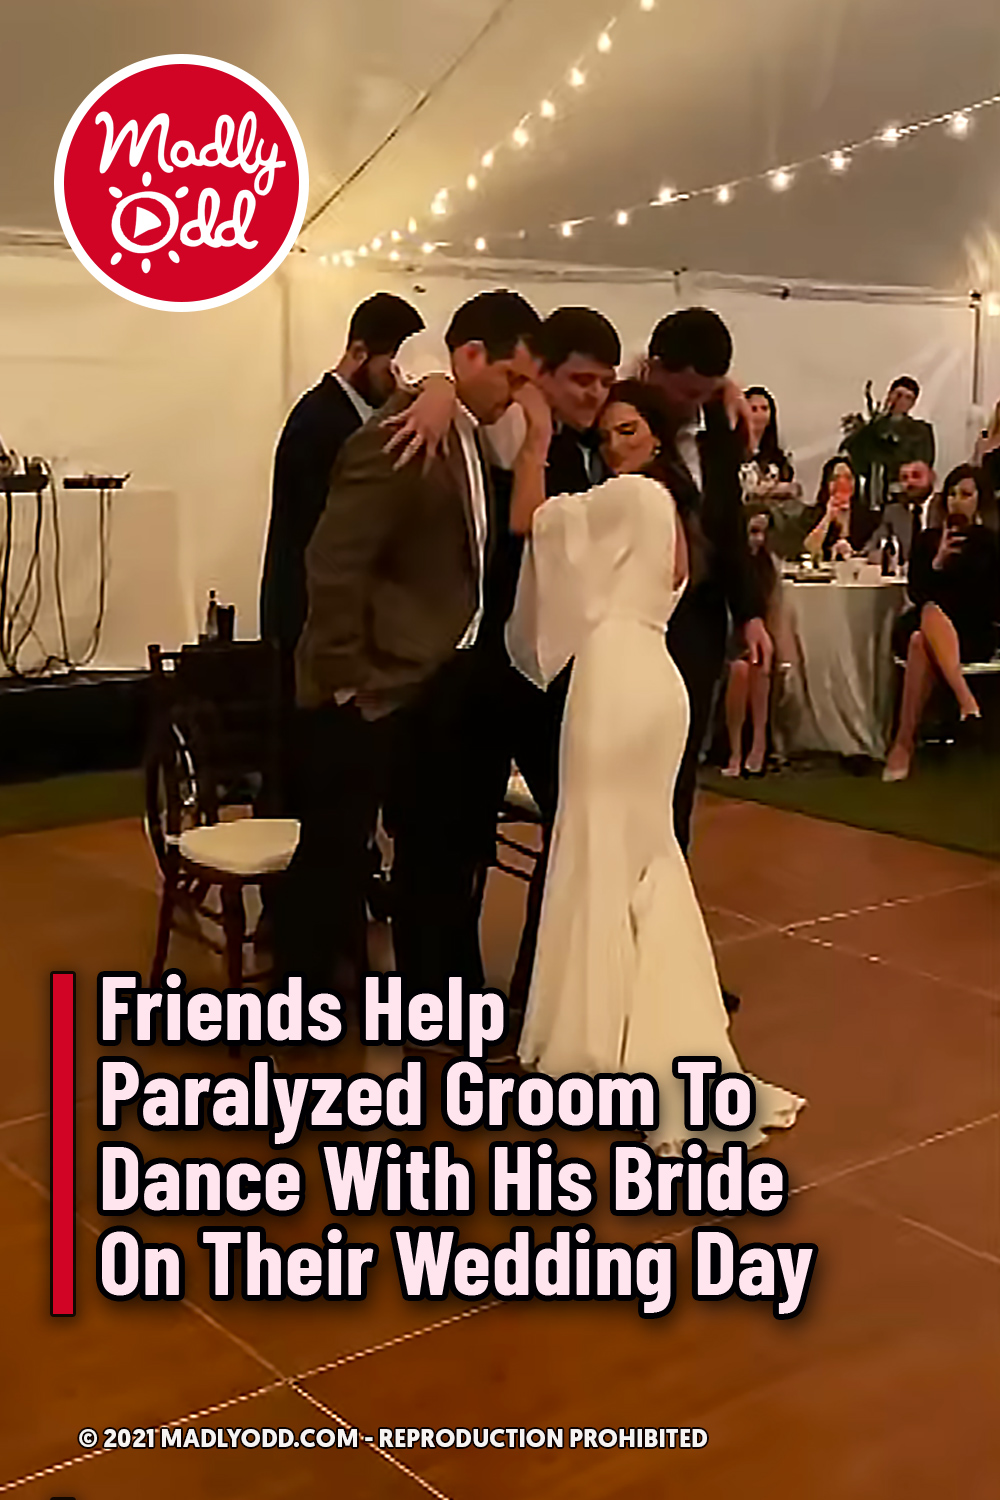 Friends Help Paralyzed Groom To Dance With His Bride On Their Wedding Day